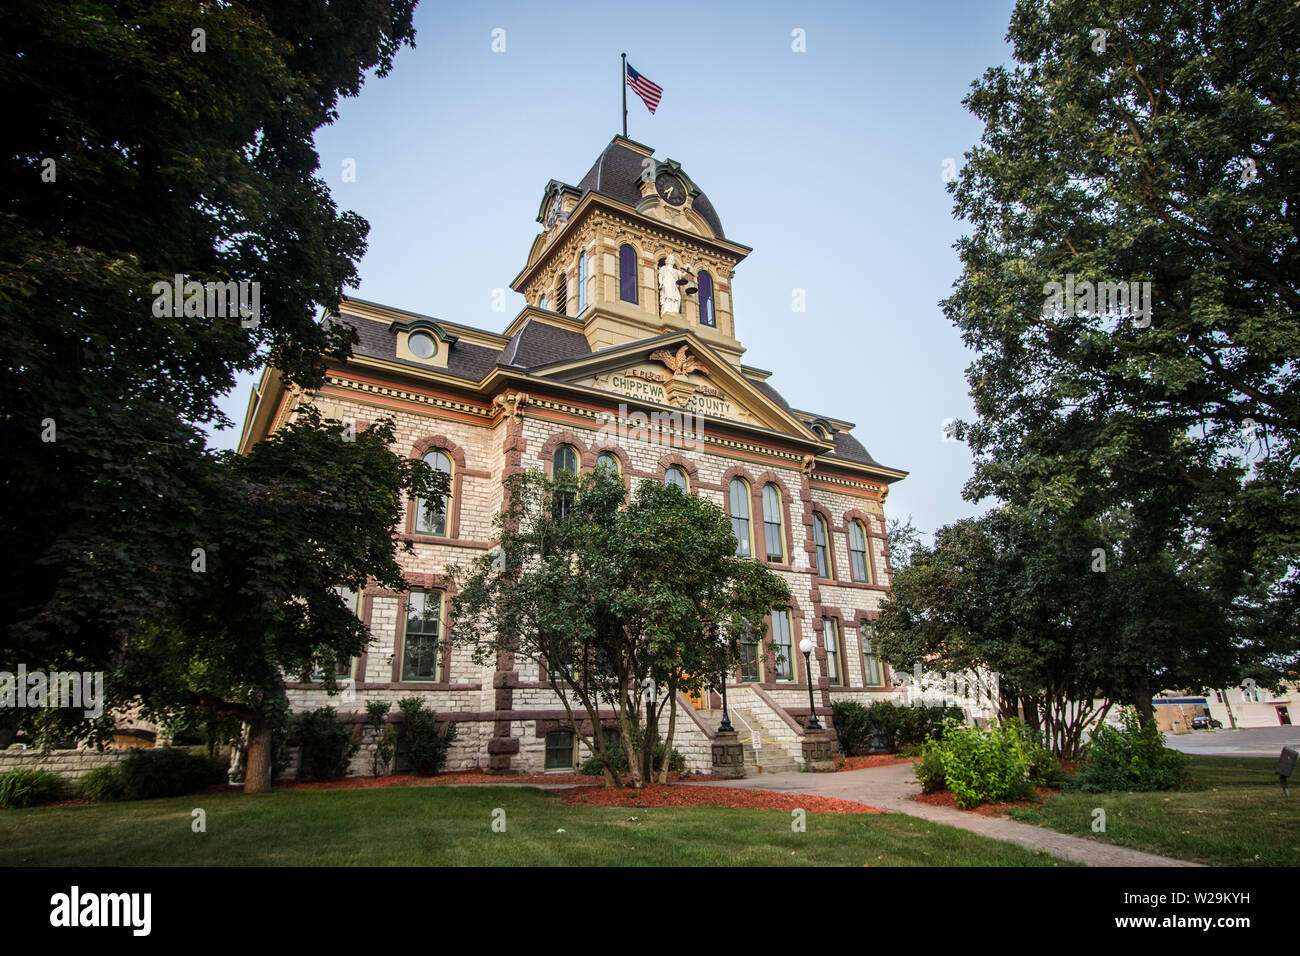 Sault Ste Marie, Michigan, USA - Exterior of the Chippewa County Courthouse in Sault Ste Marie in the Upper Peninsula of Michigan. Stock Photo